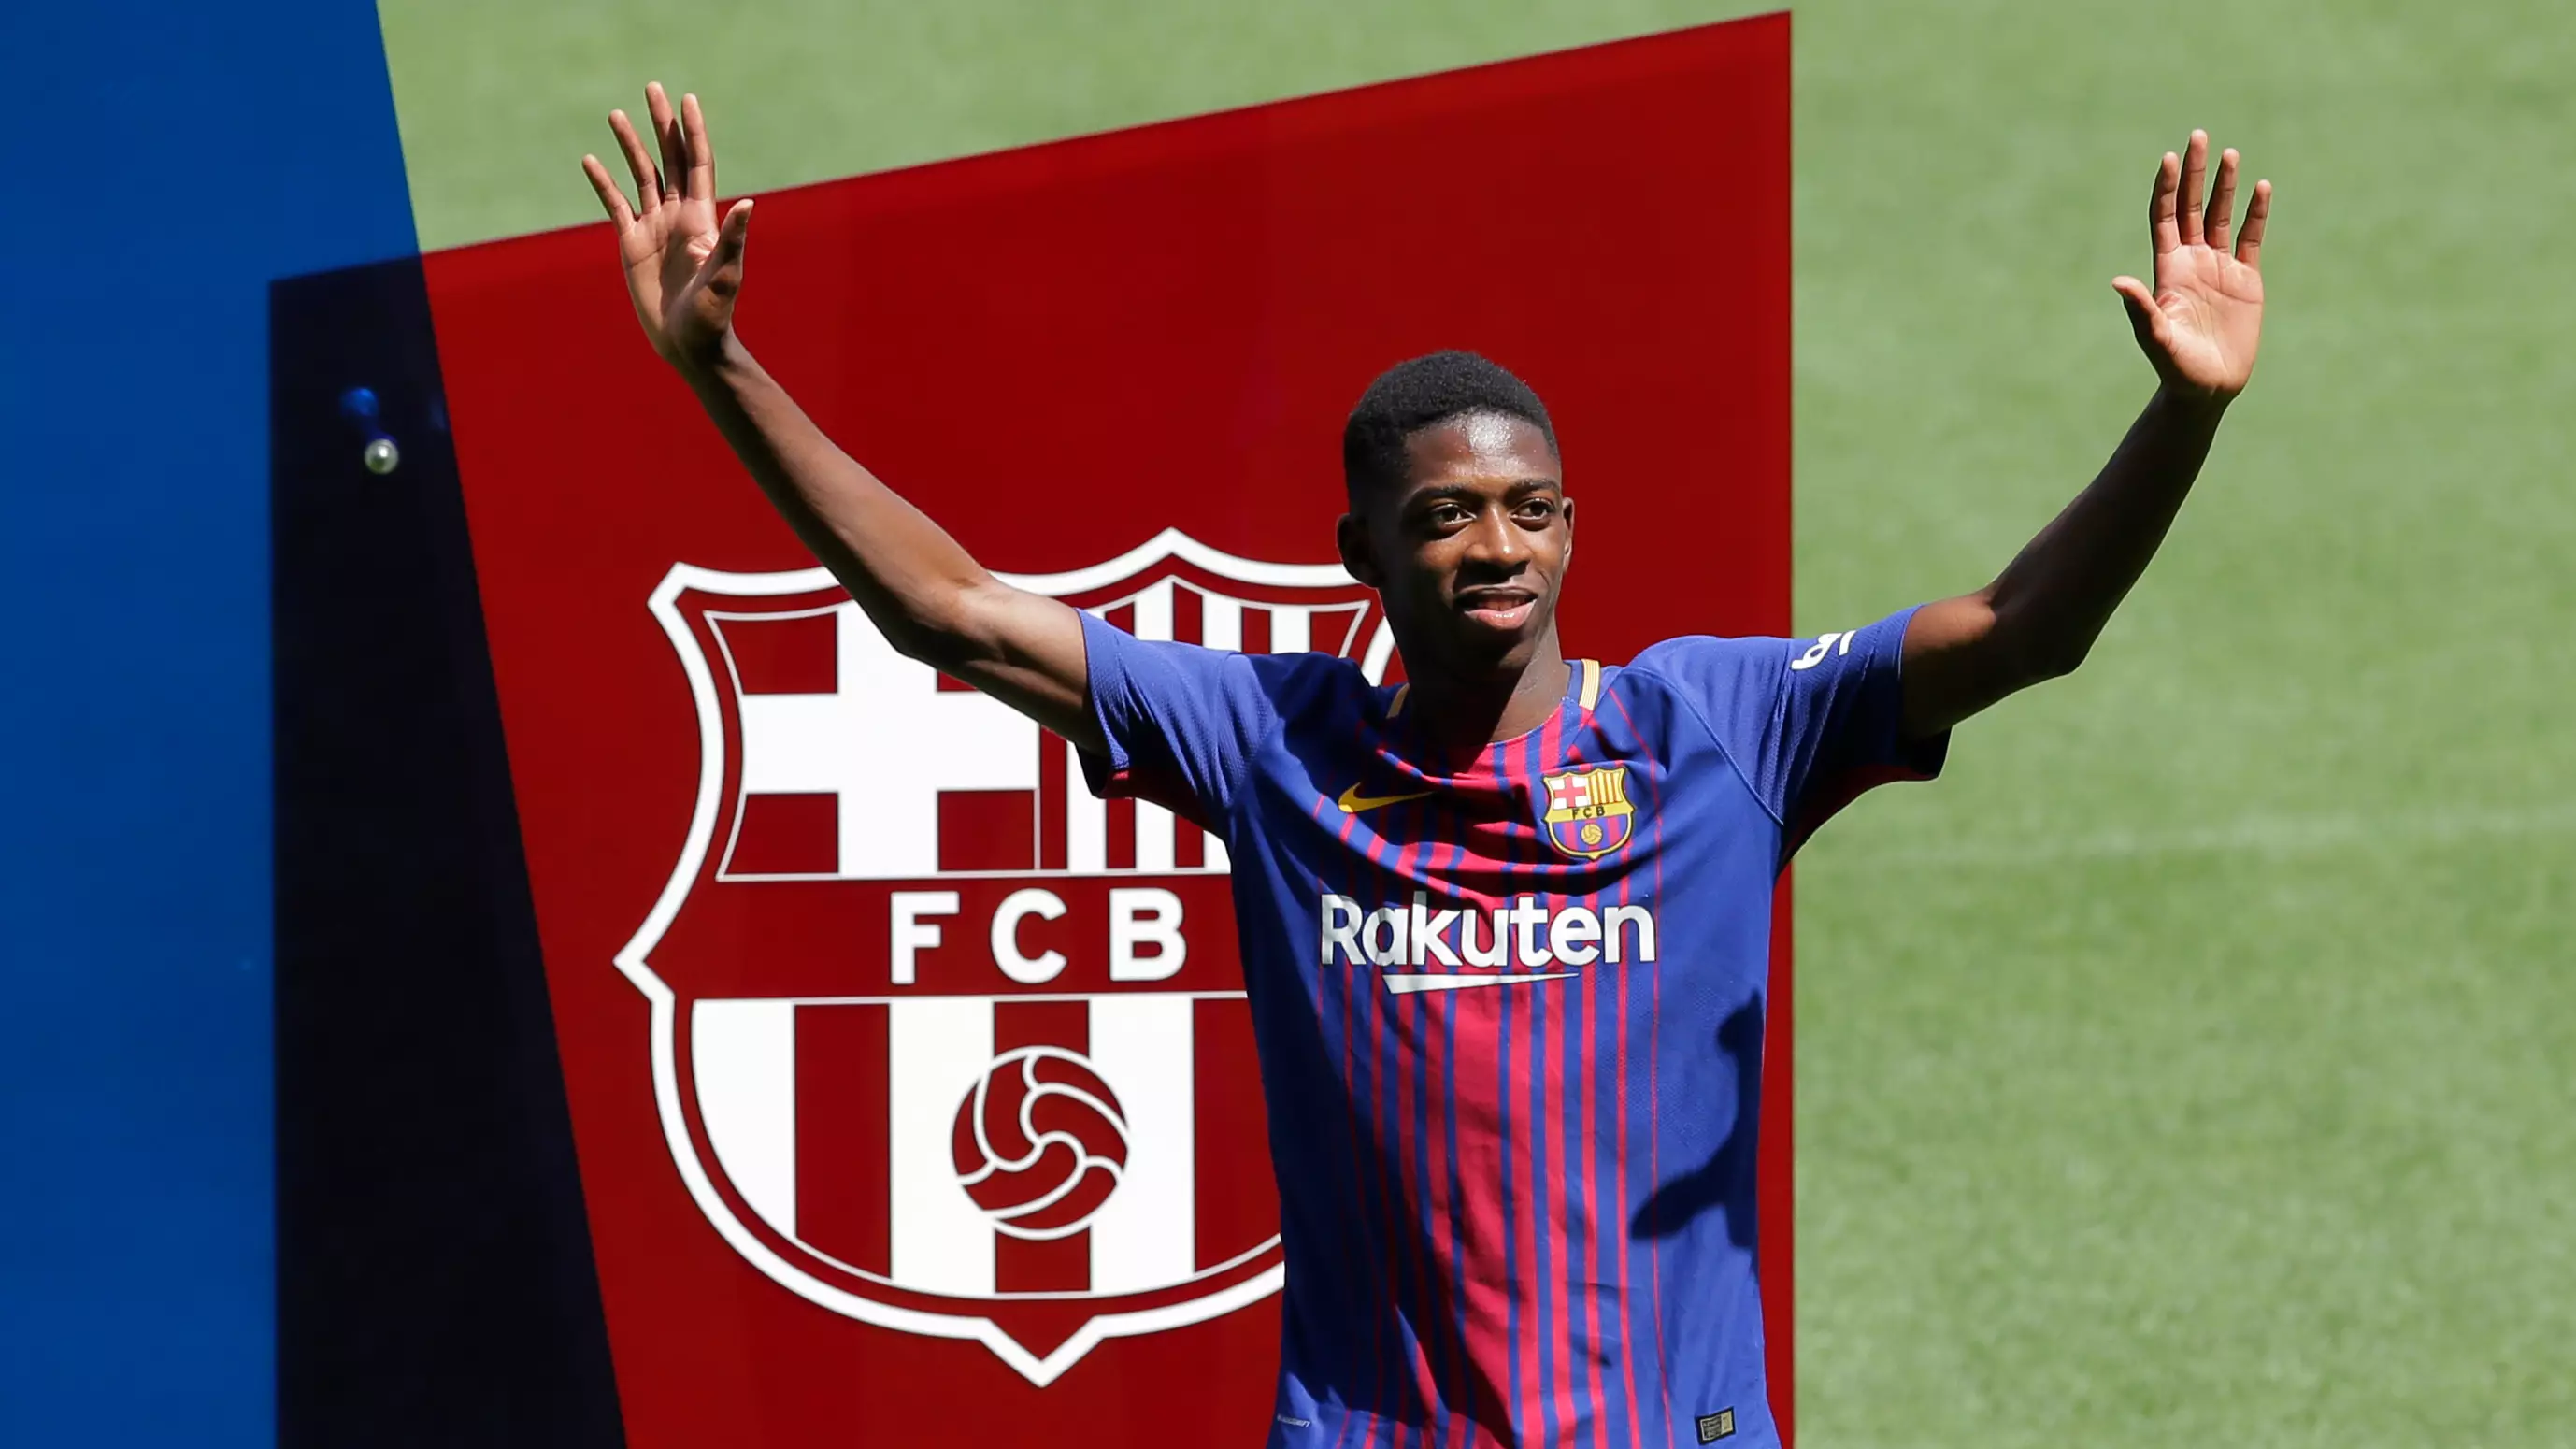 Barcelona Manager Already Frustrated With New Signing Ousmane Dembele